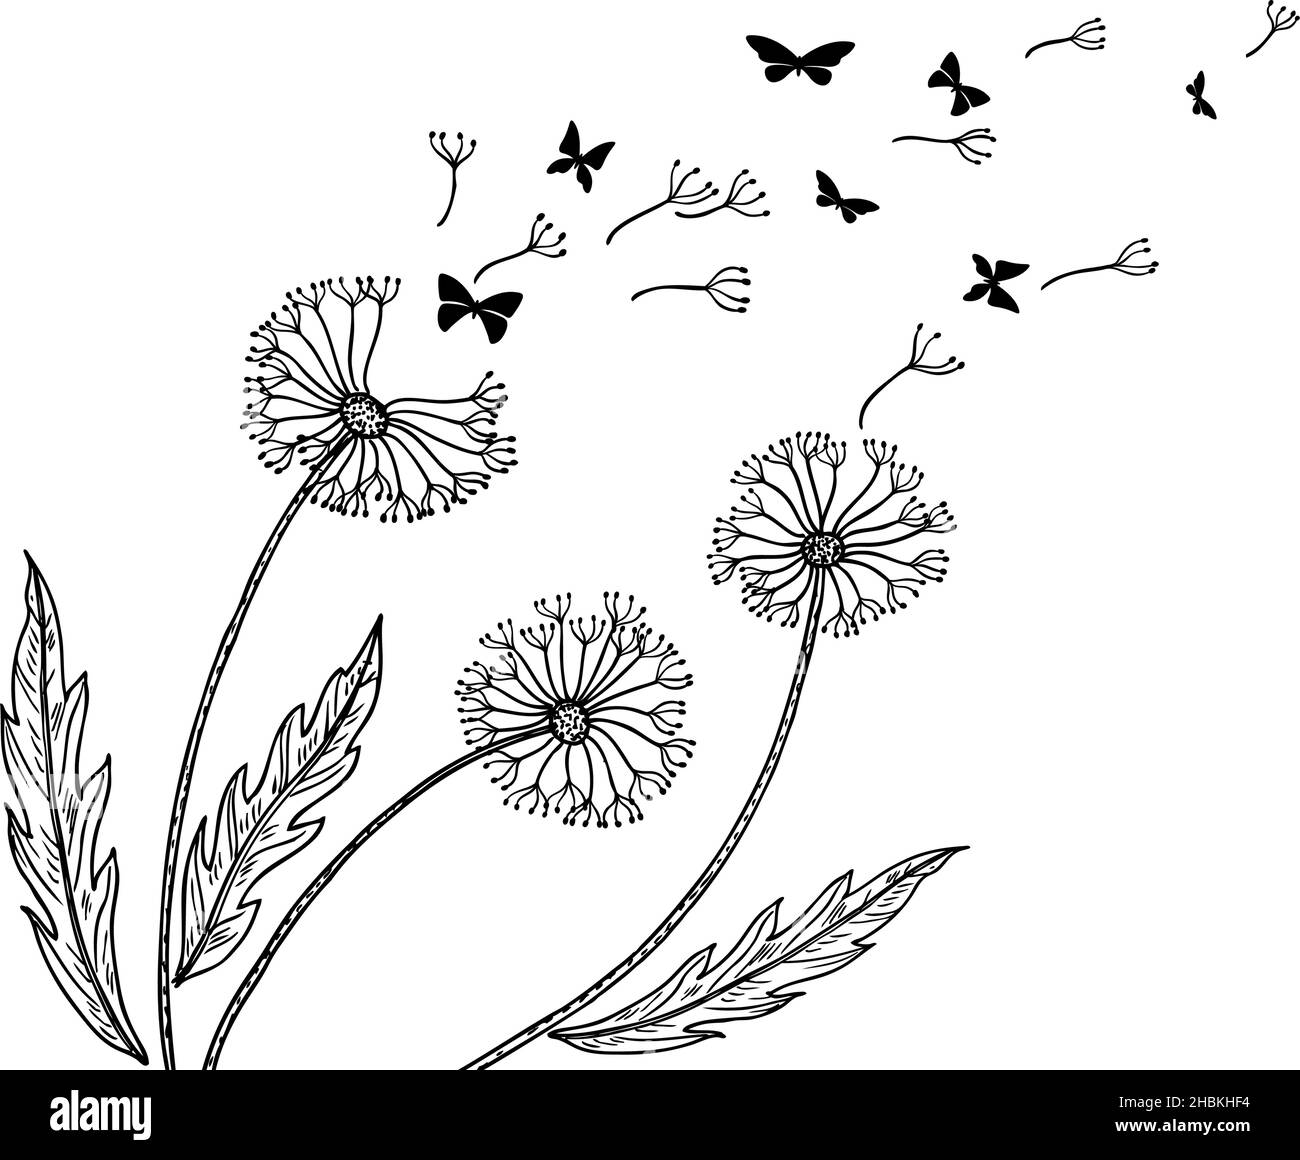 Dandelion background. Dandelions seeds flight, blow wind metaphor. Abstract flower and butterfly silhouettes. Relaxing art, freedom neoteric vector Stock Vector